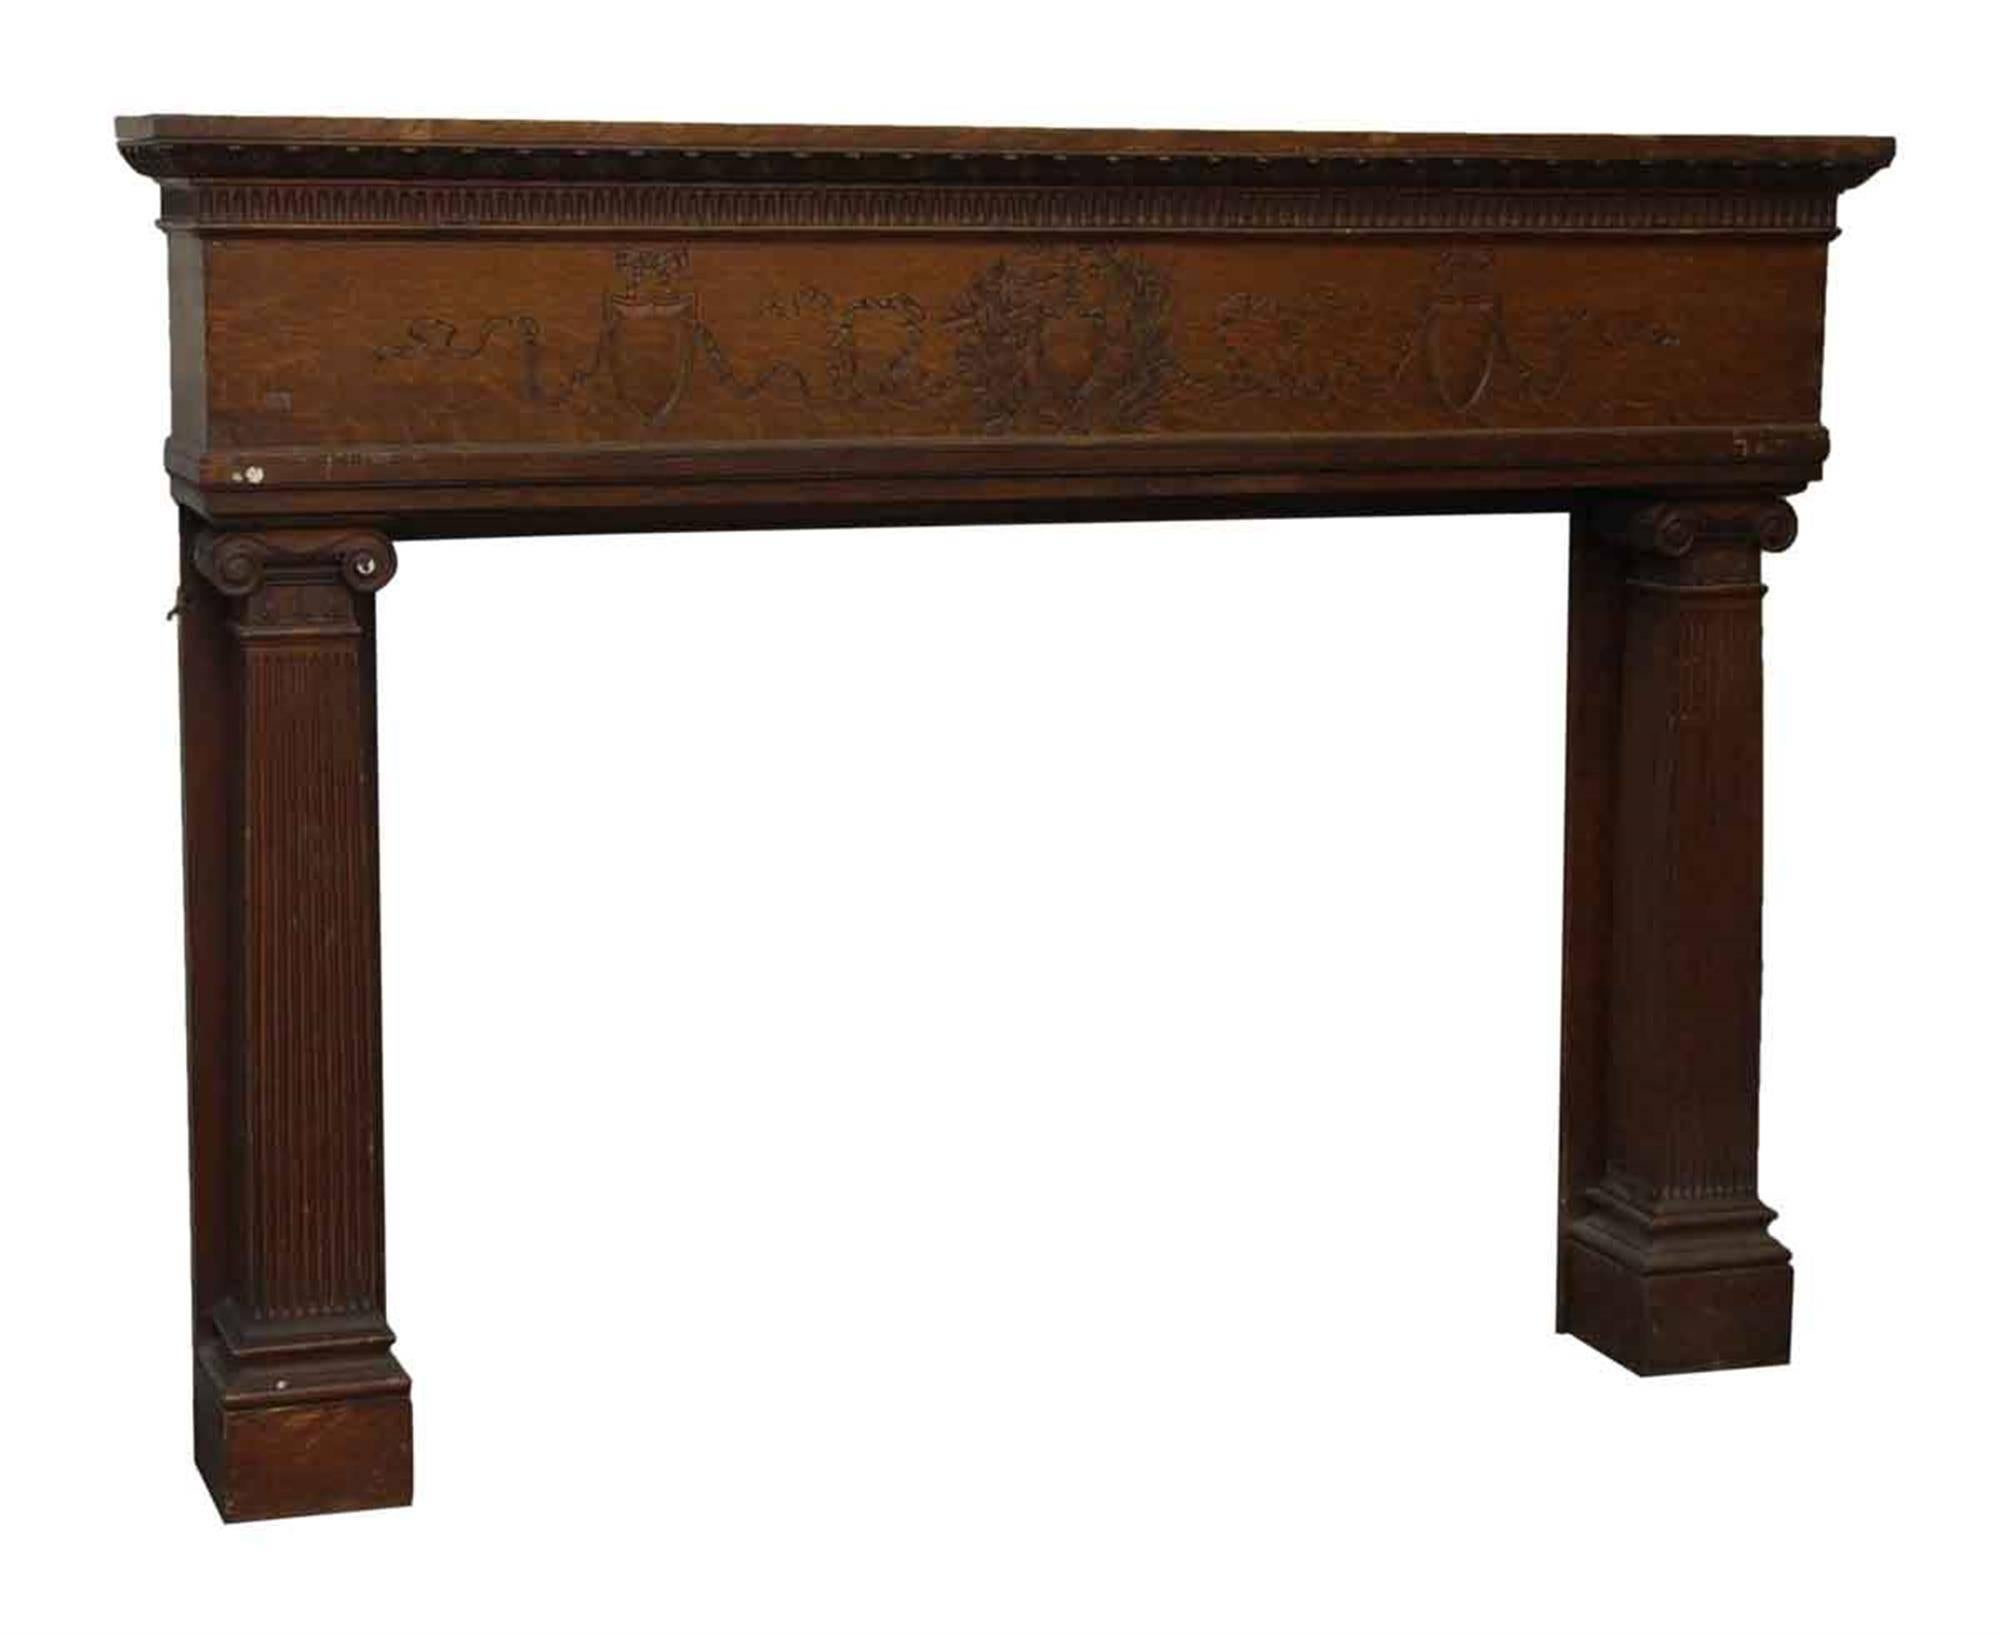 1920s extra wide mantel with hand-carved details adorning the face plate of the mantel. This can be seen at our 400 Gilligan St location in Scranton, PA.